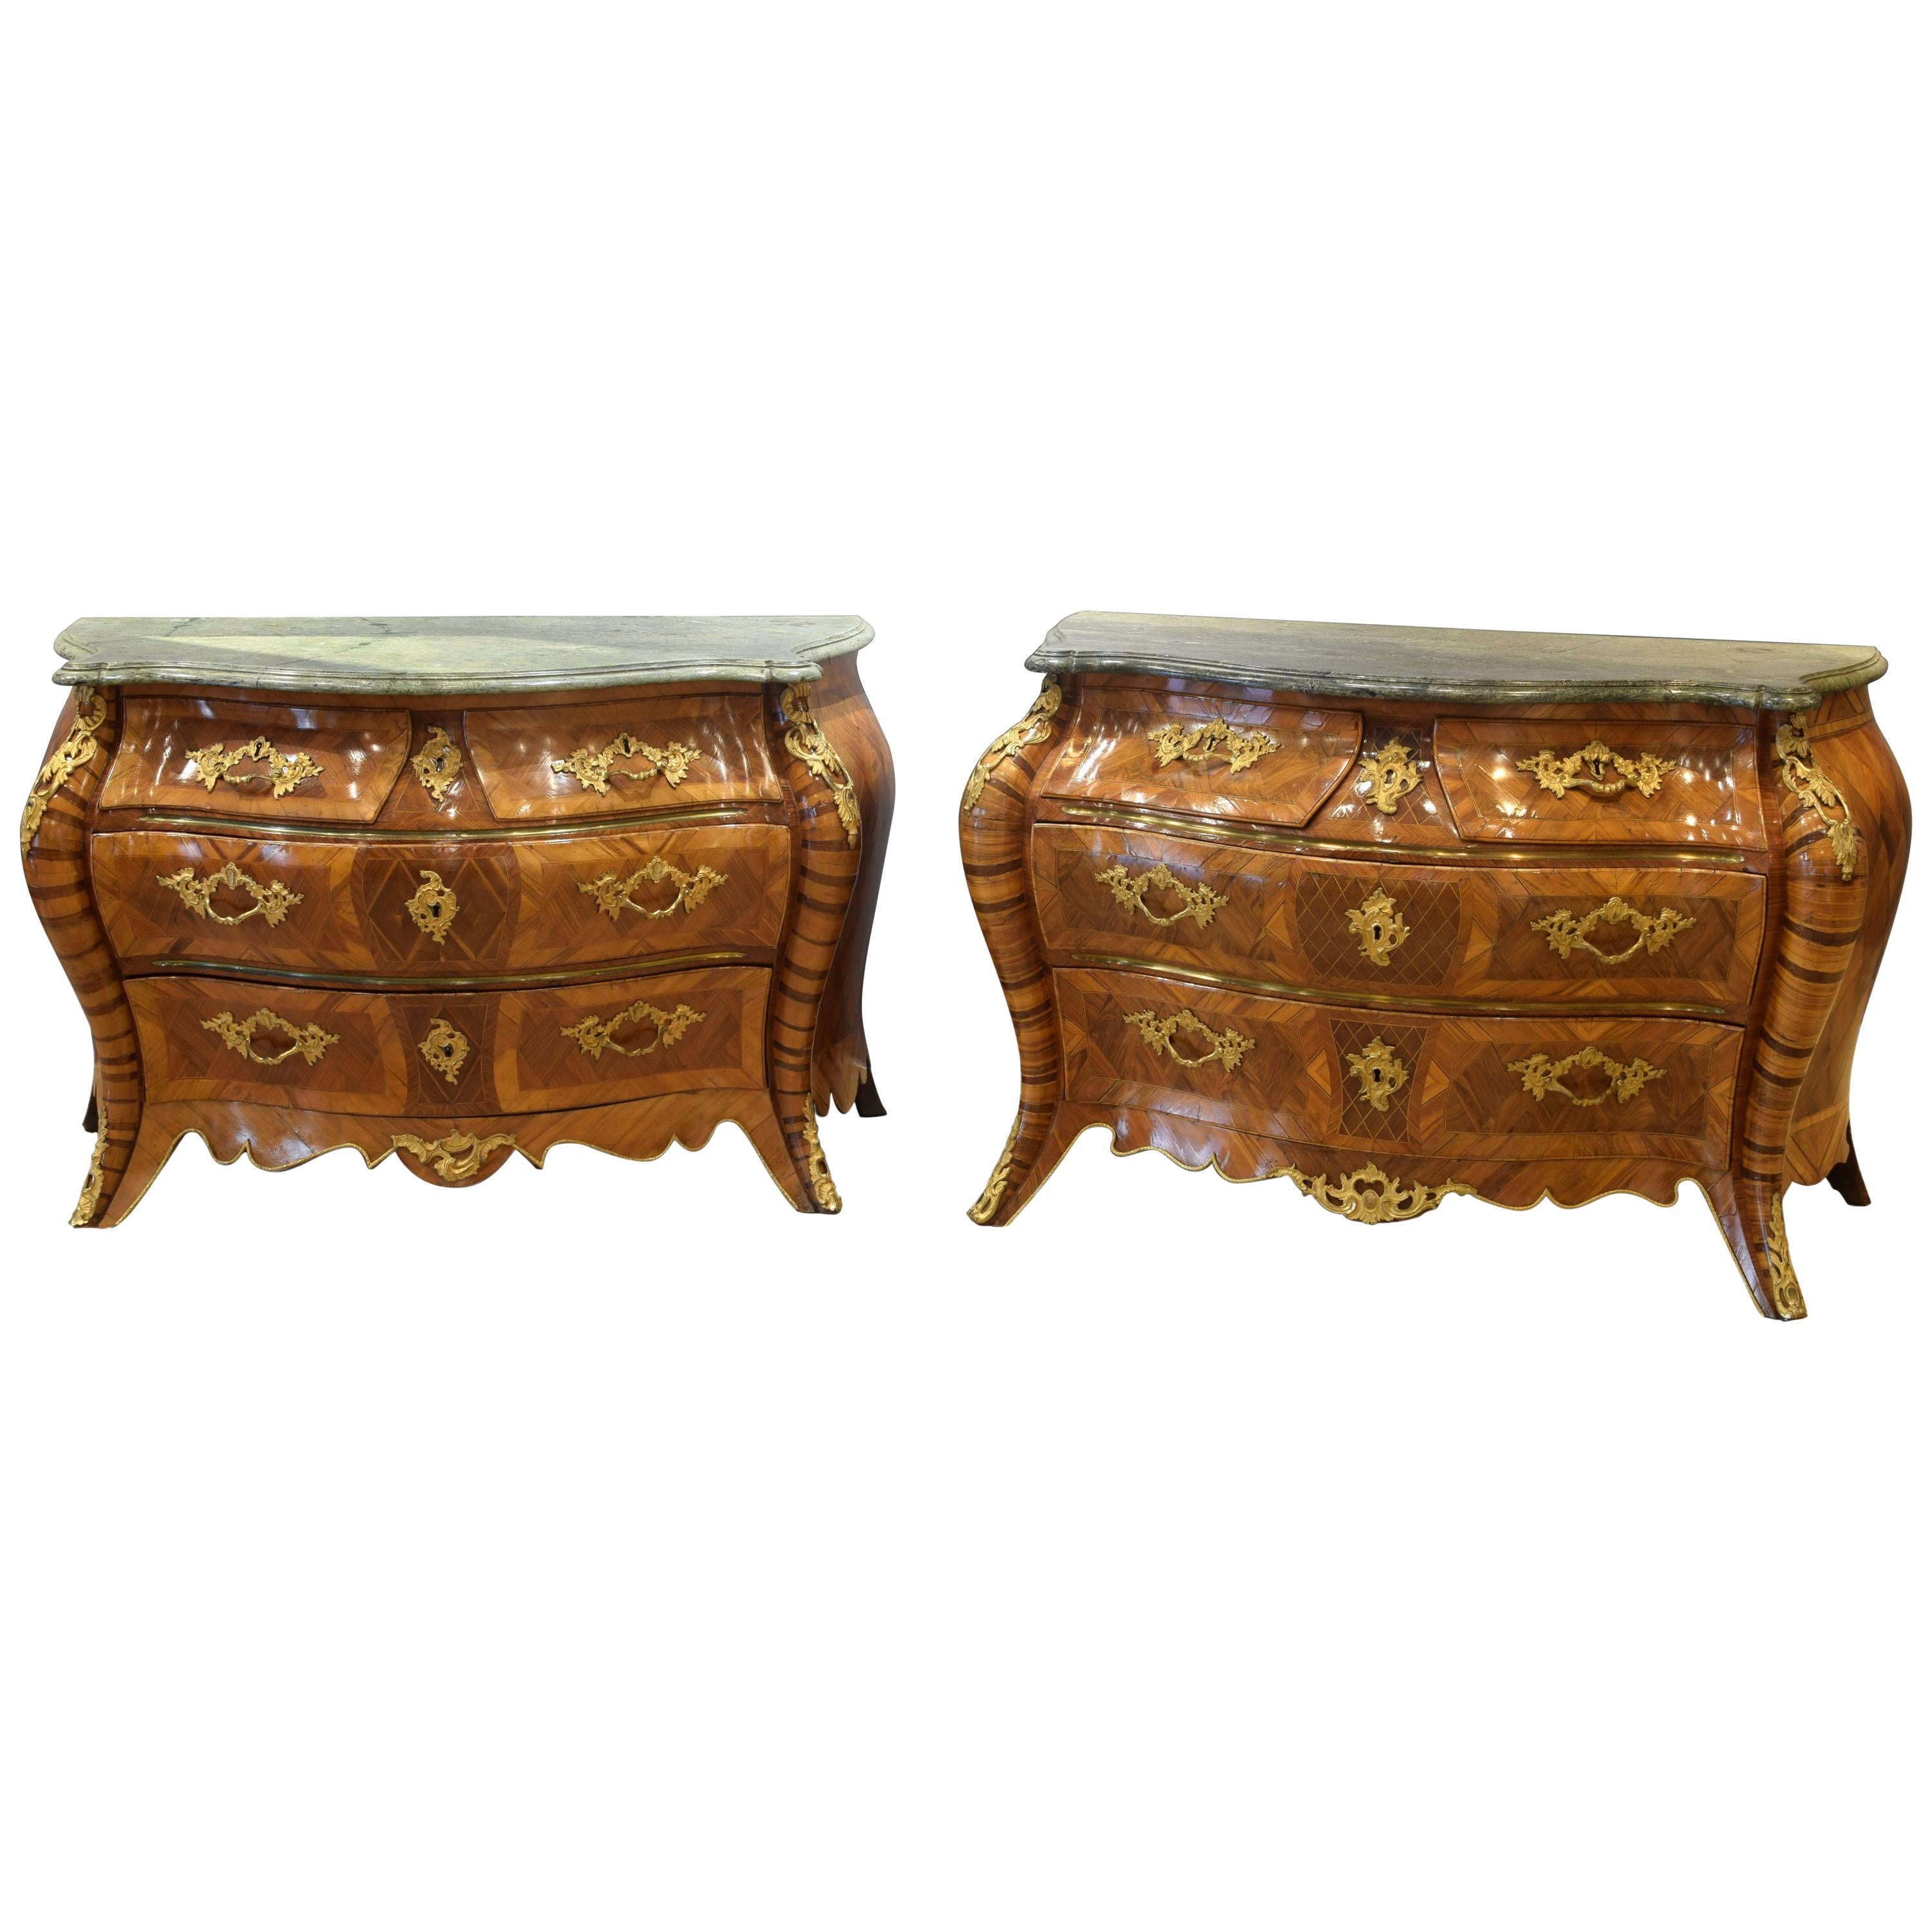 Pair of Bombe Commodes, Wood, Marble, Bronze, Sweden, 18th Century